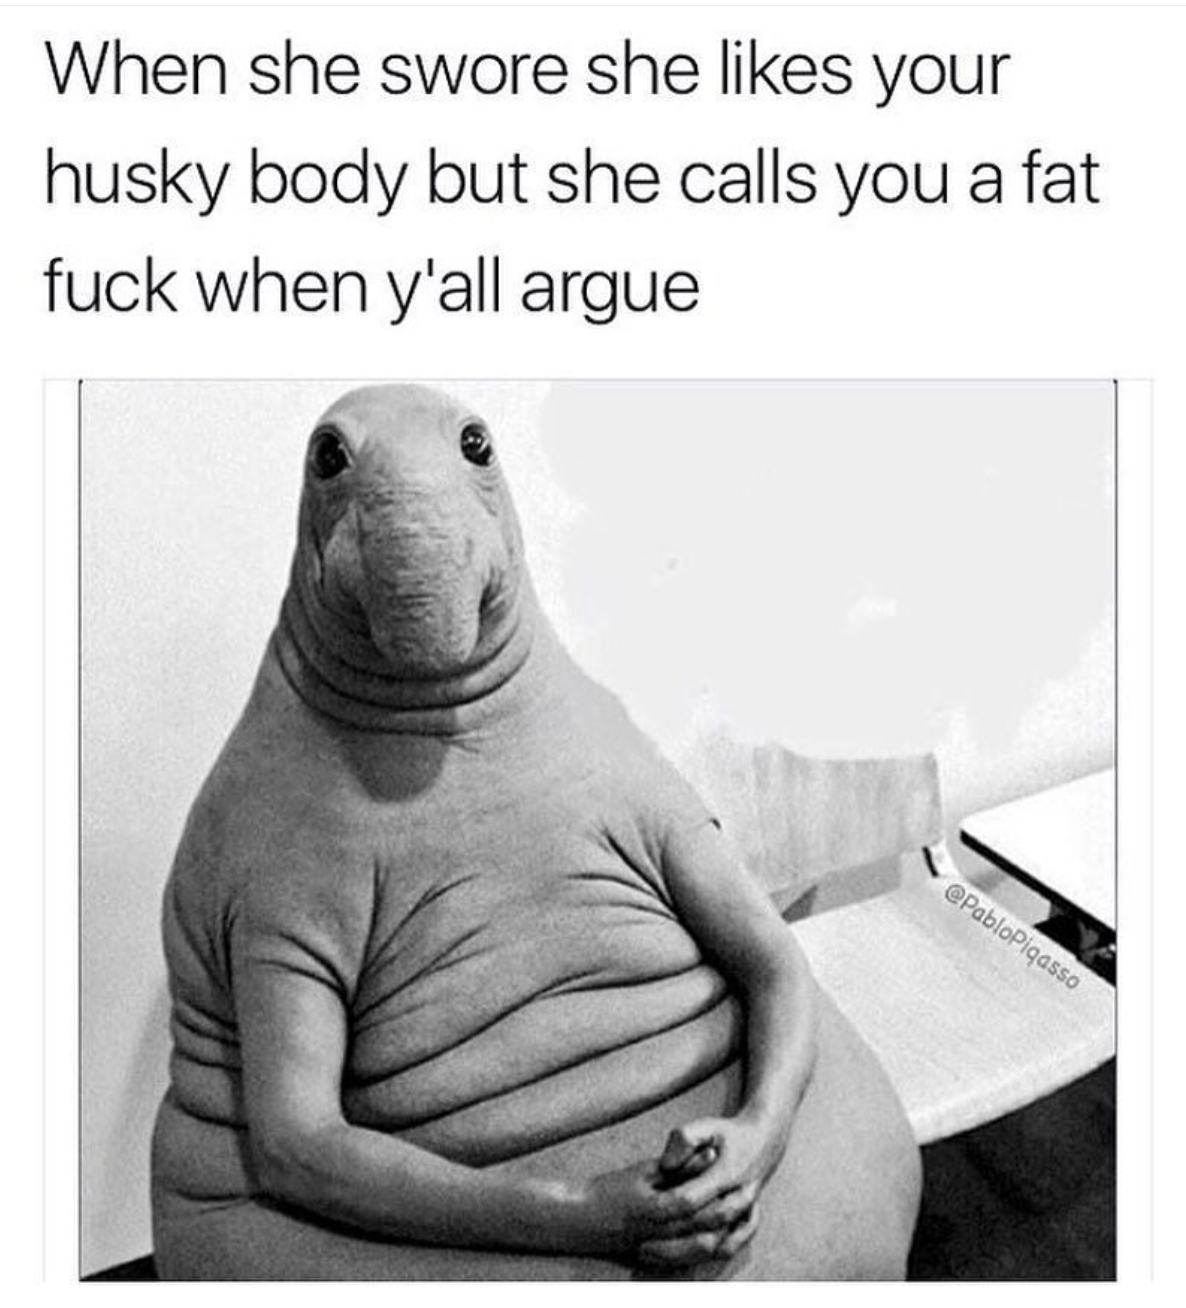 she says she likes you fat meme - When she swore she your husky body but she calls you a fat fuck when y'all argue Pablo Picasso